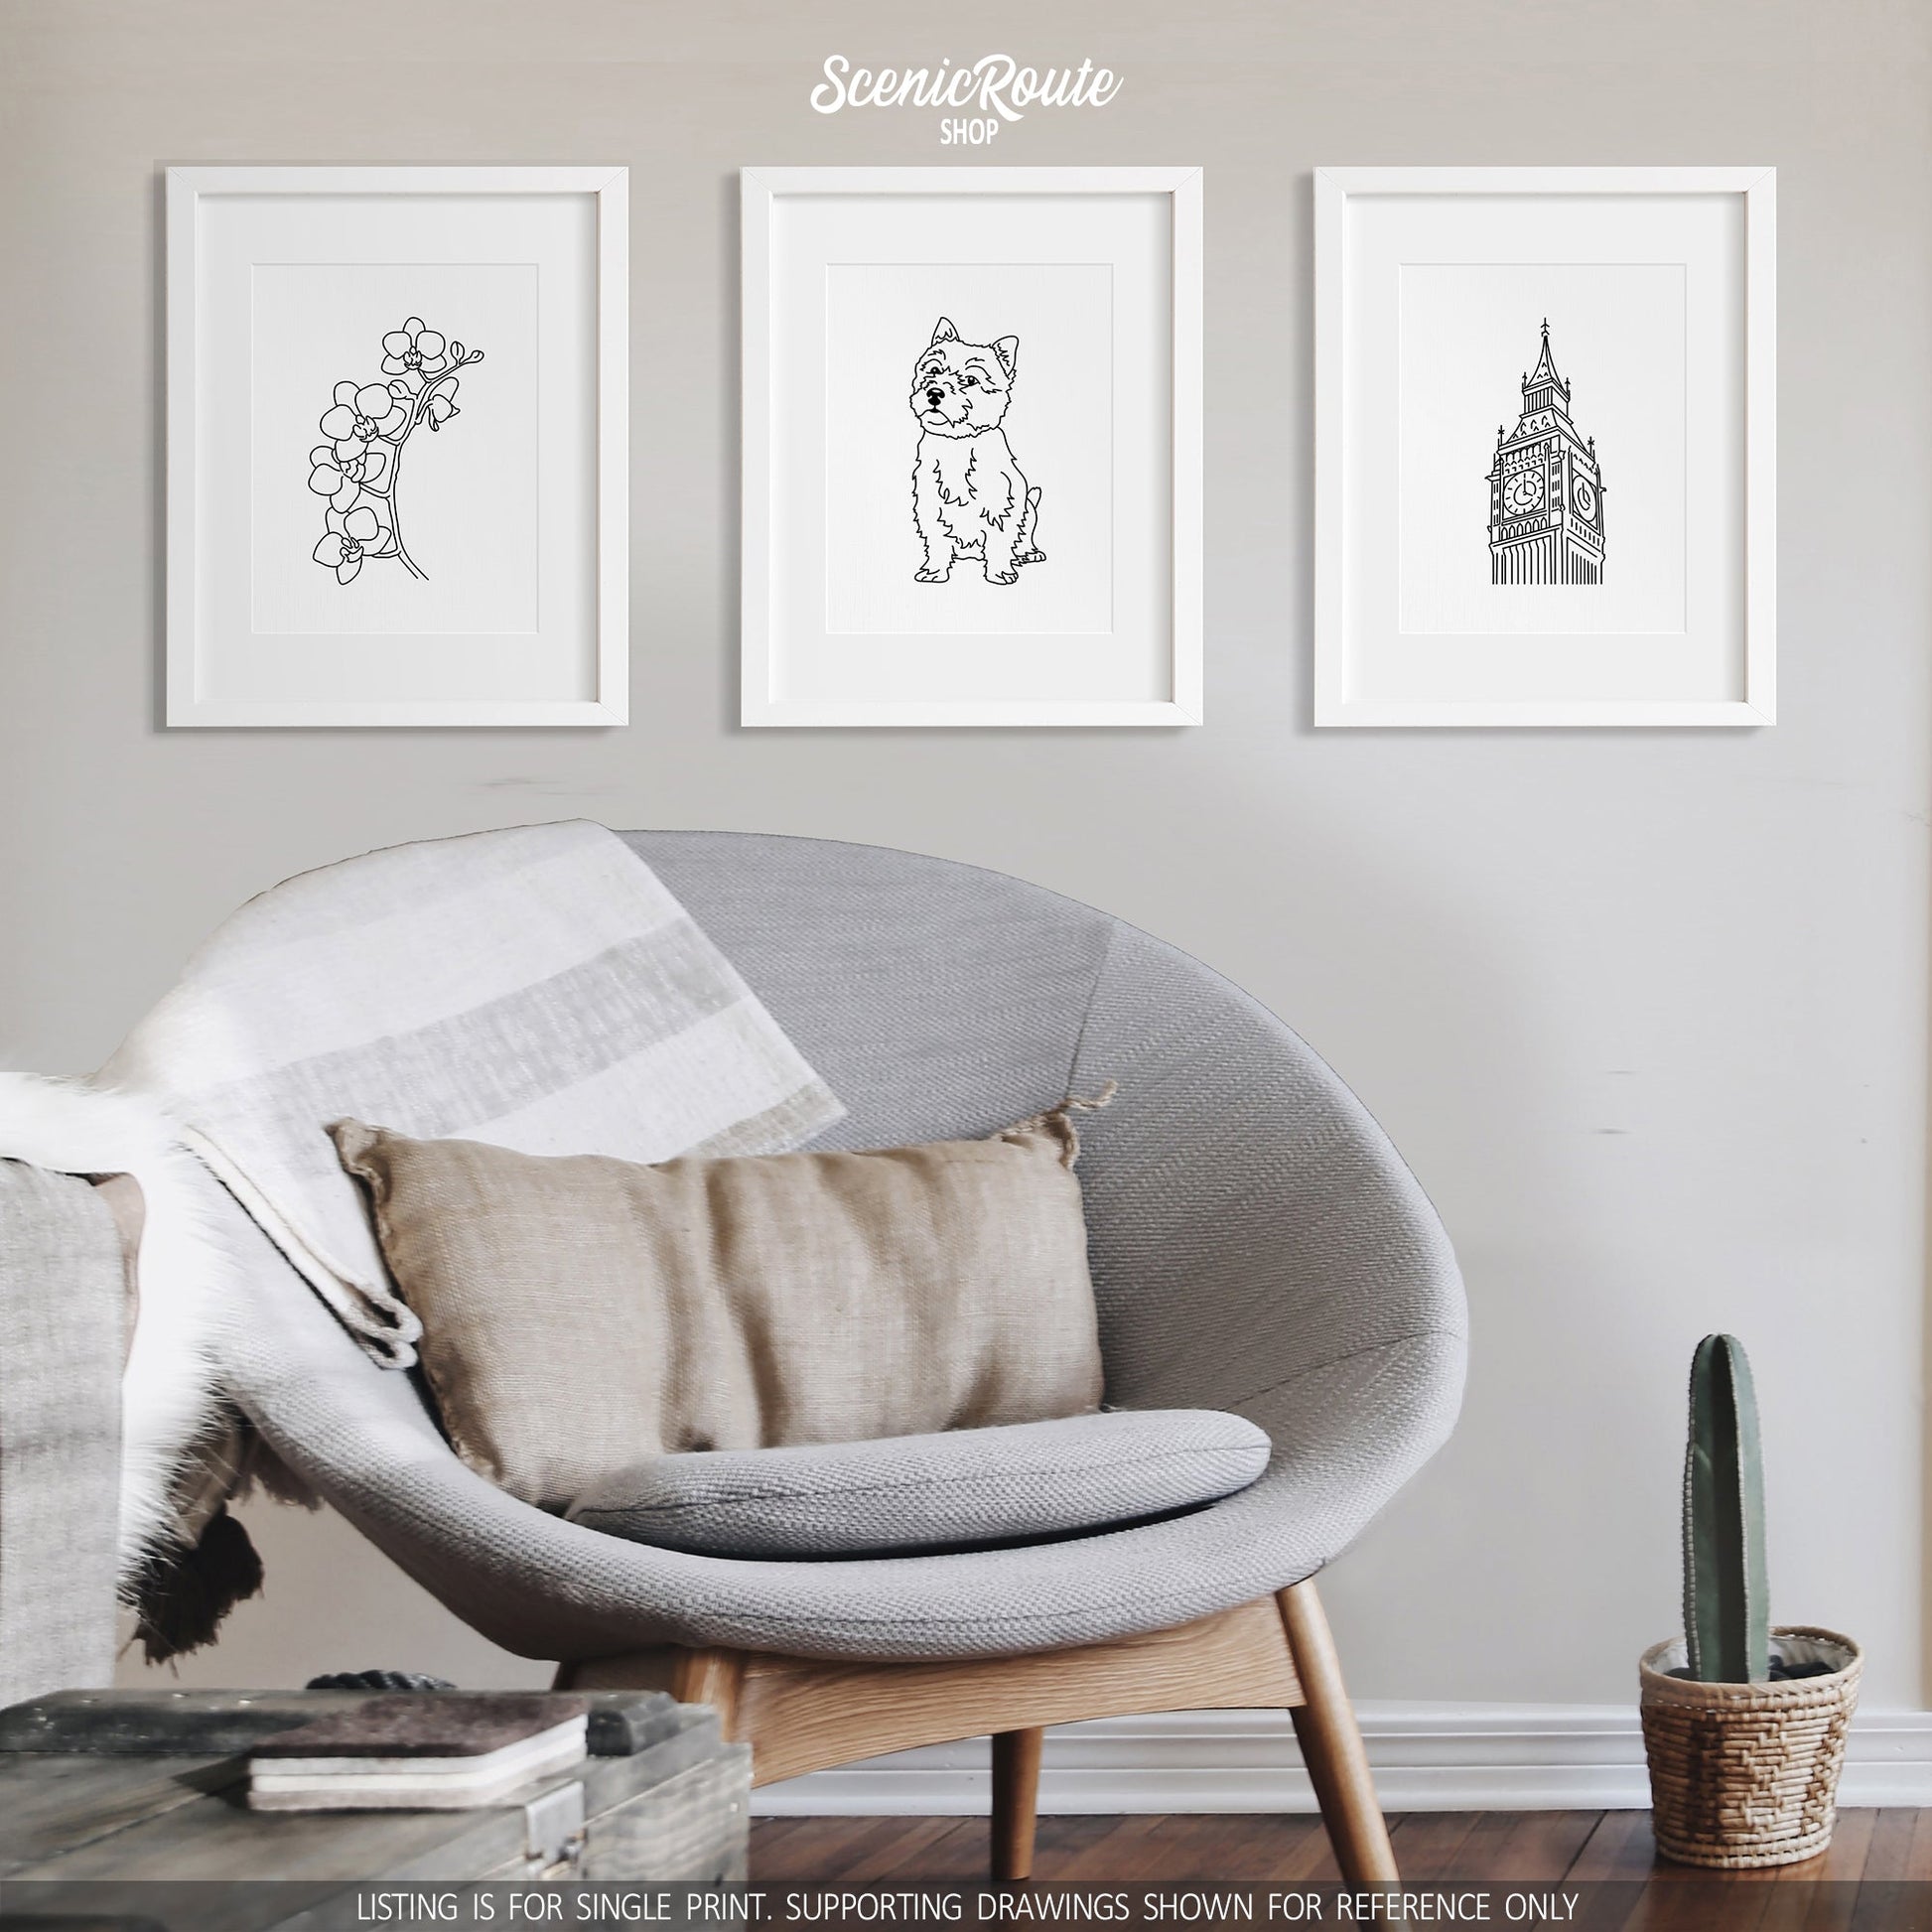 A group of three framed drawings on a white wall above a round chair. The line art drawings include an Orchid Flower, a Norwich Terrier dog, and Big Ben